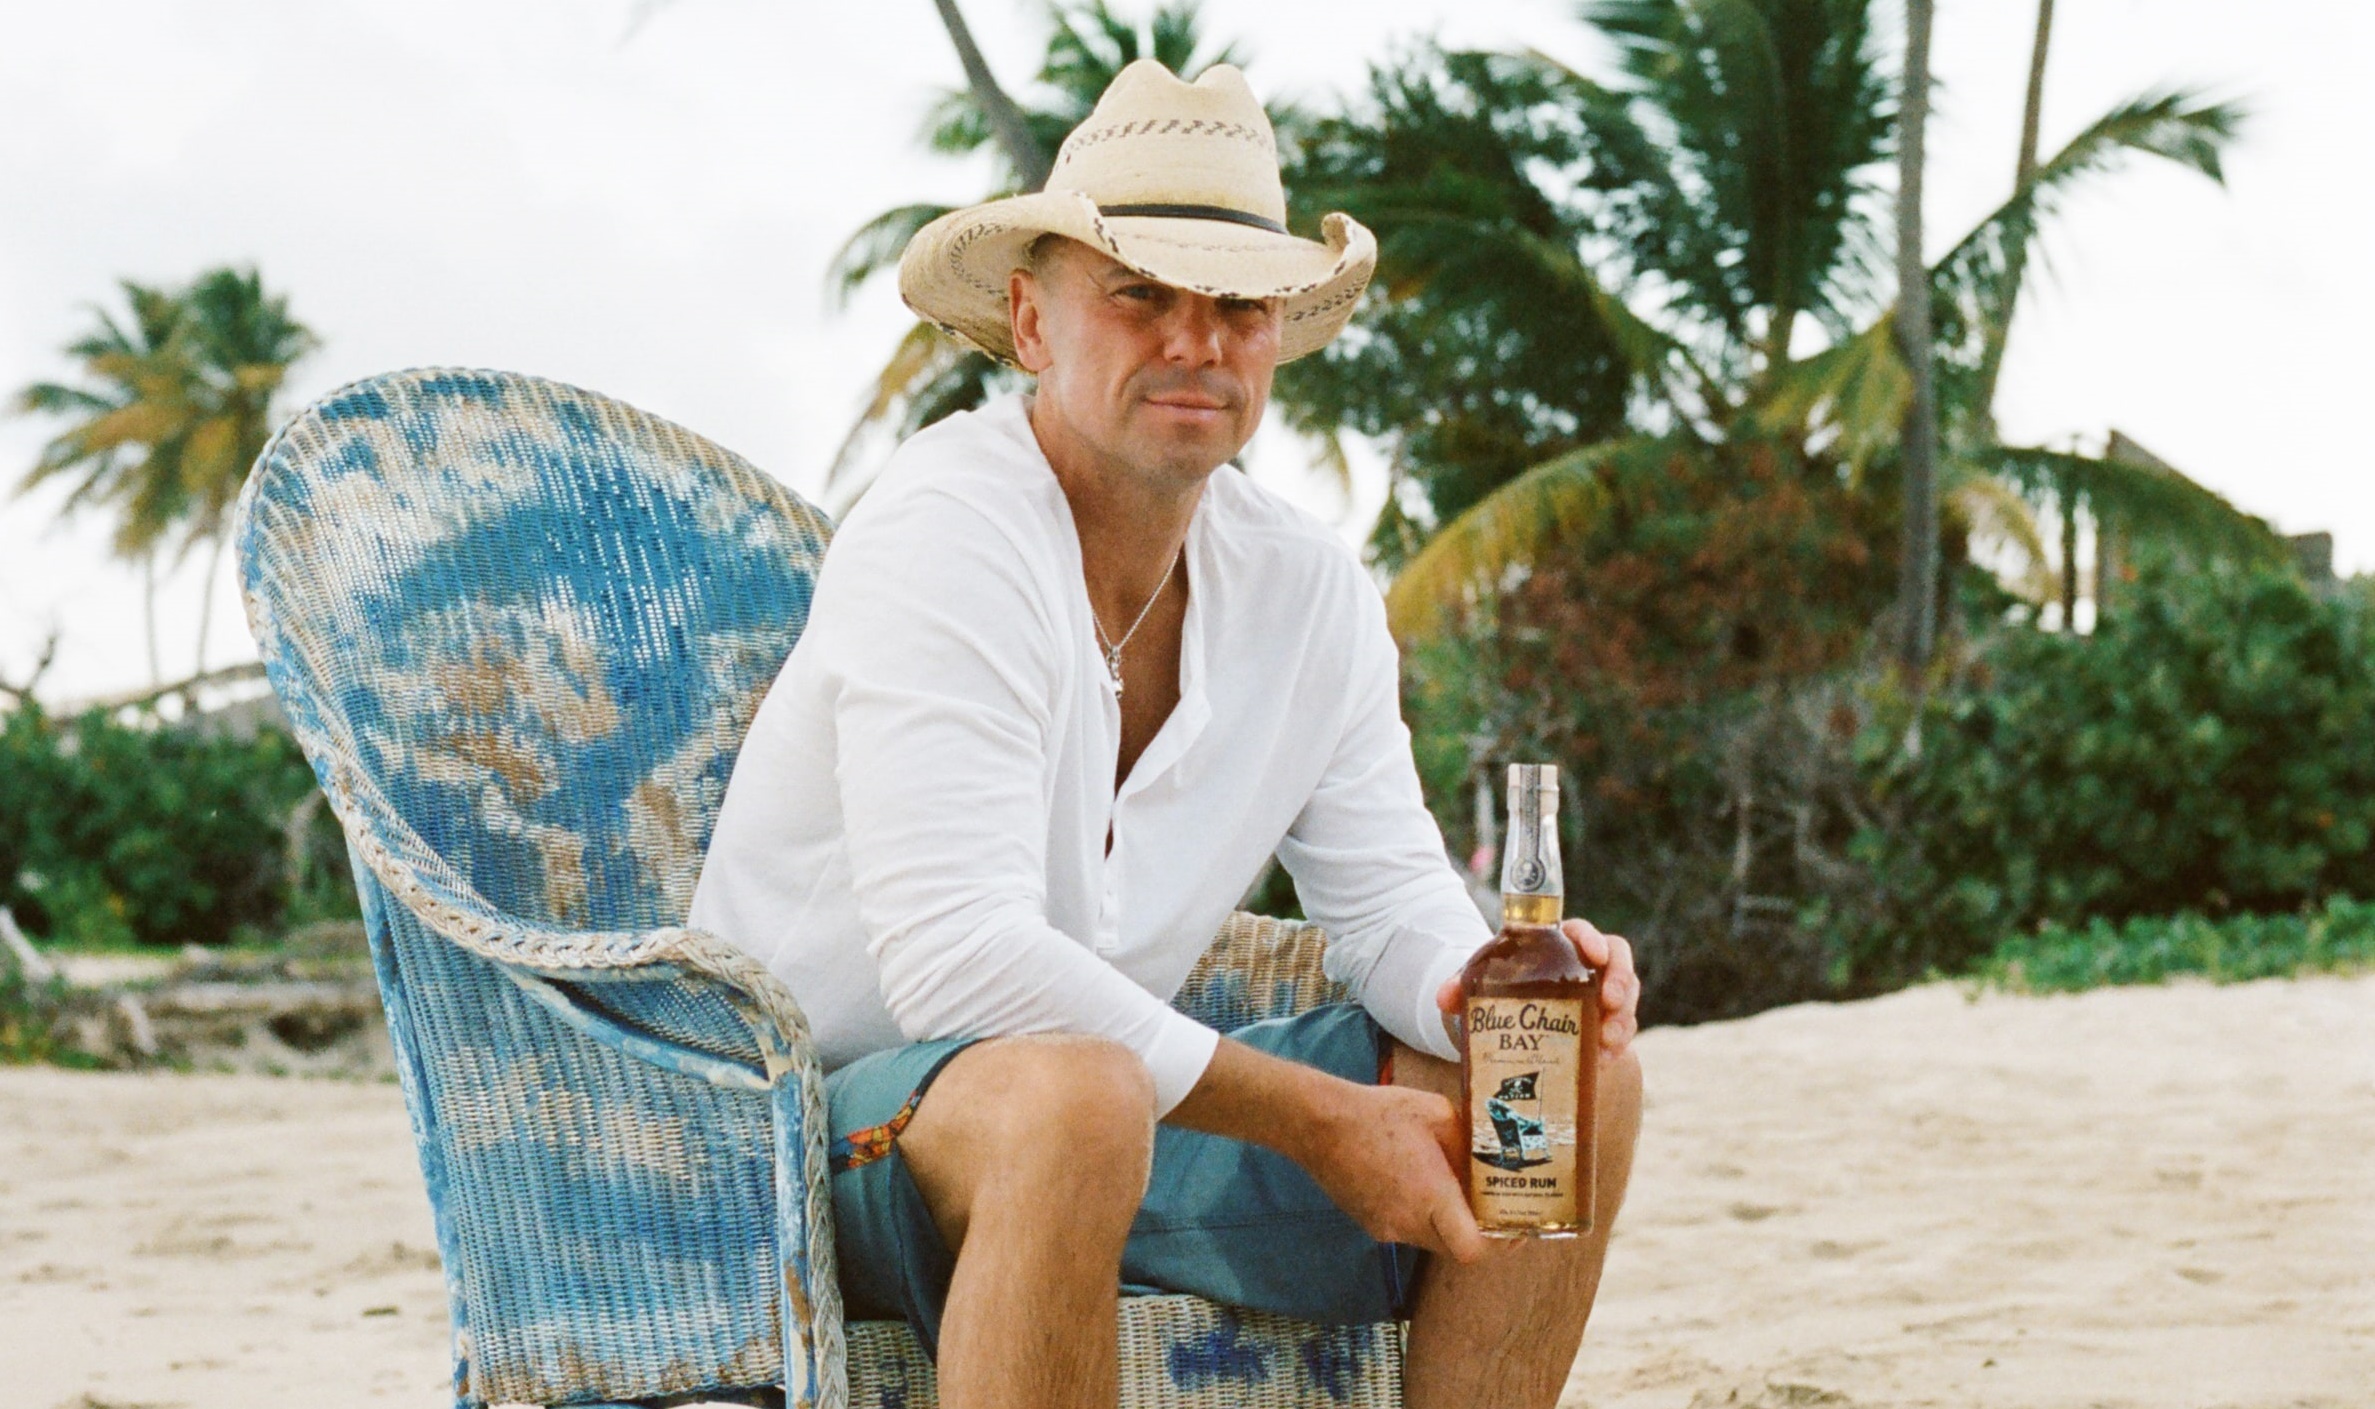 Let Kenny Chesney S Blue Chair Bay Rum Take You On A Trip To The Islands Sounds Like Nashville